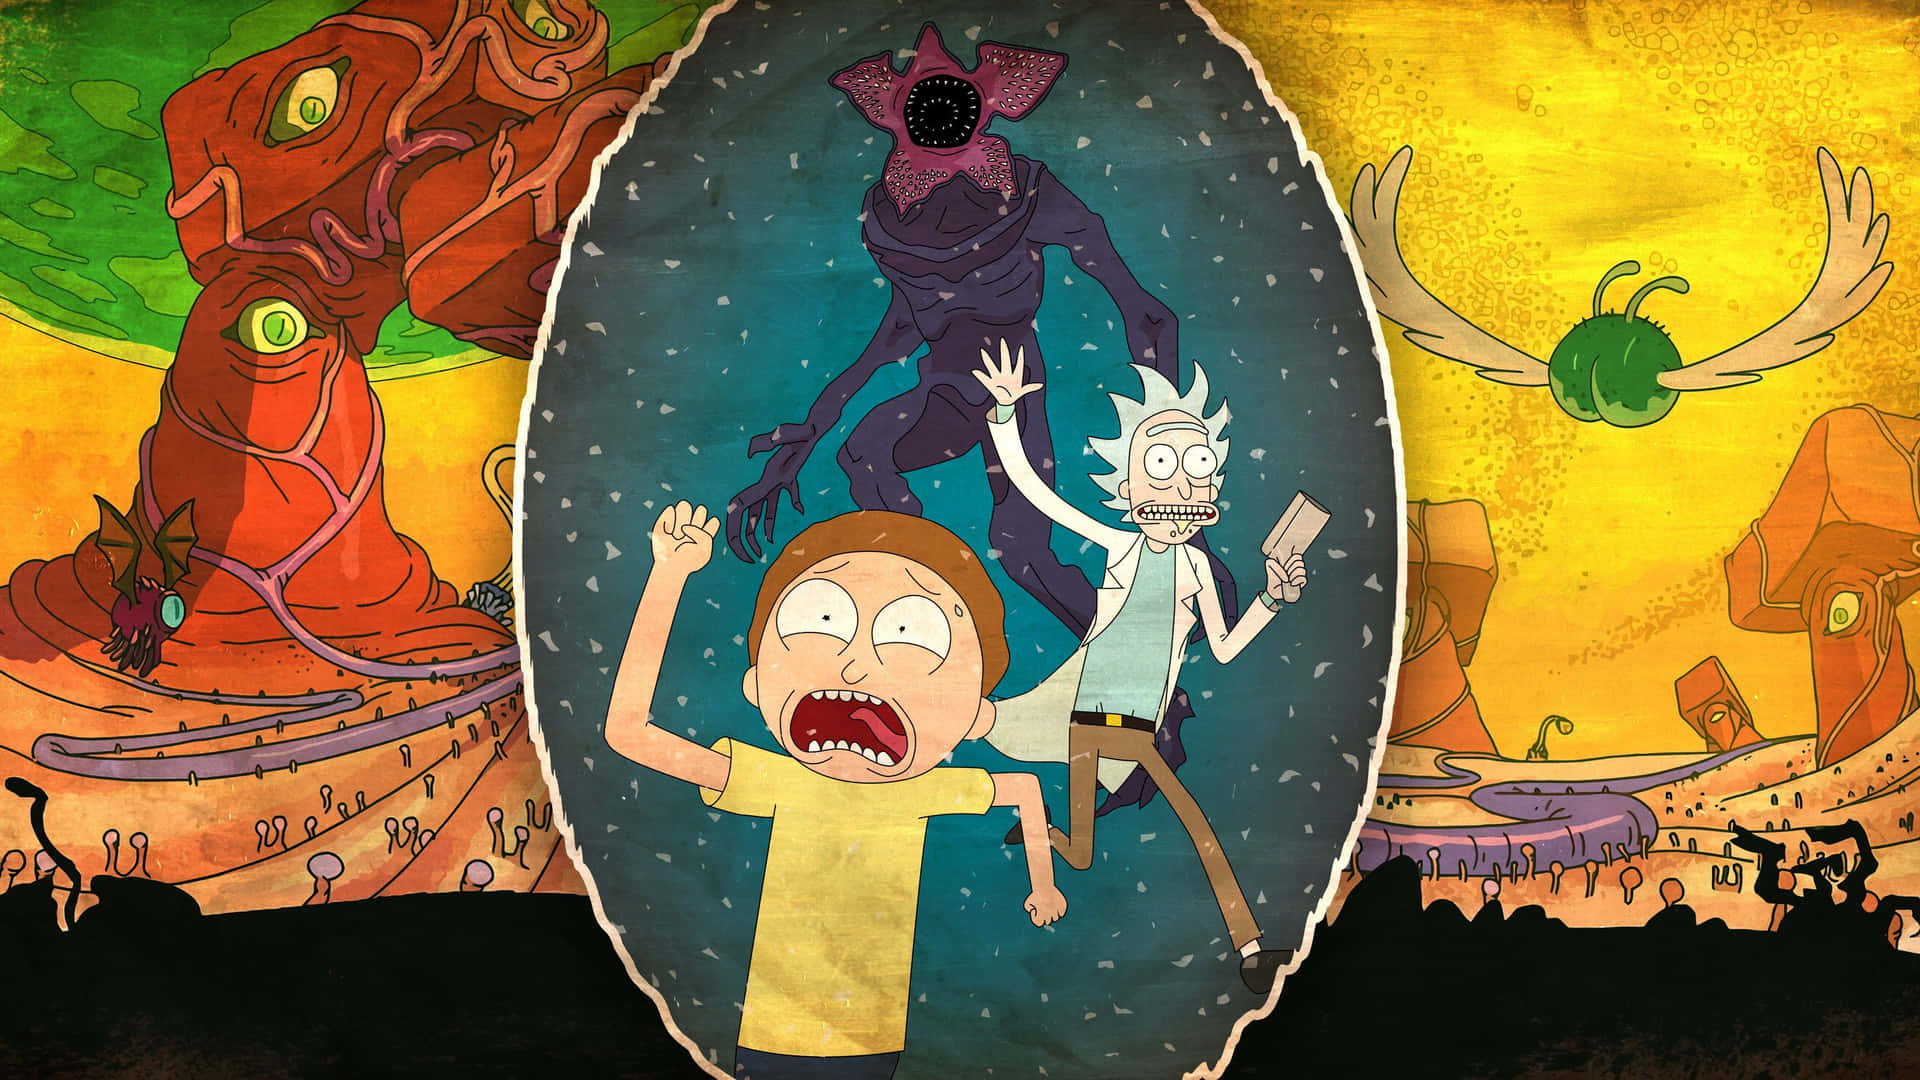 "Rick and Morty take a wild trip in this stunning fan art!" Wallpaper